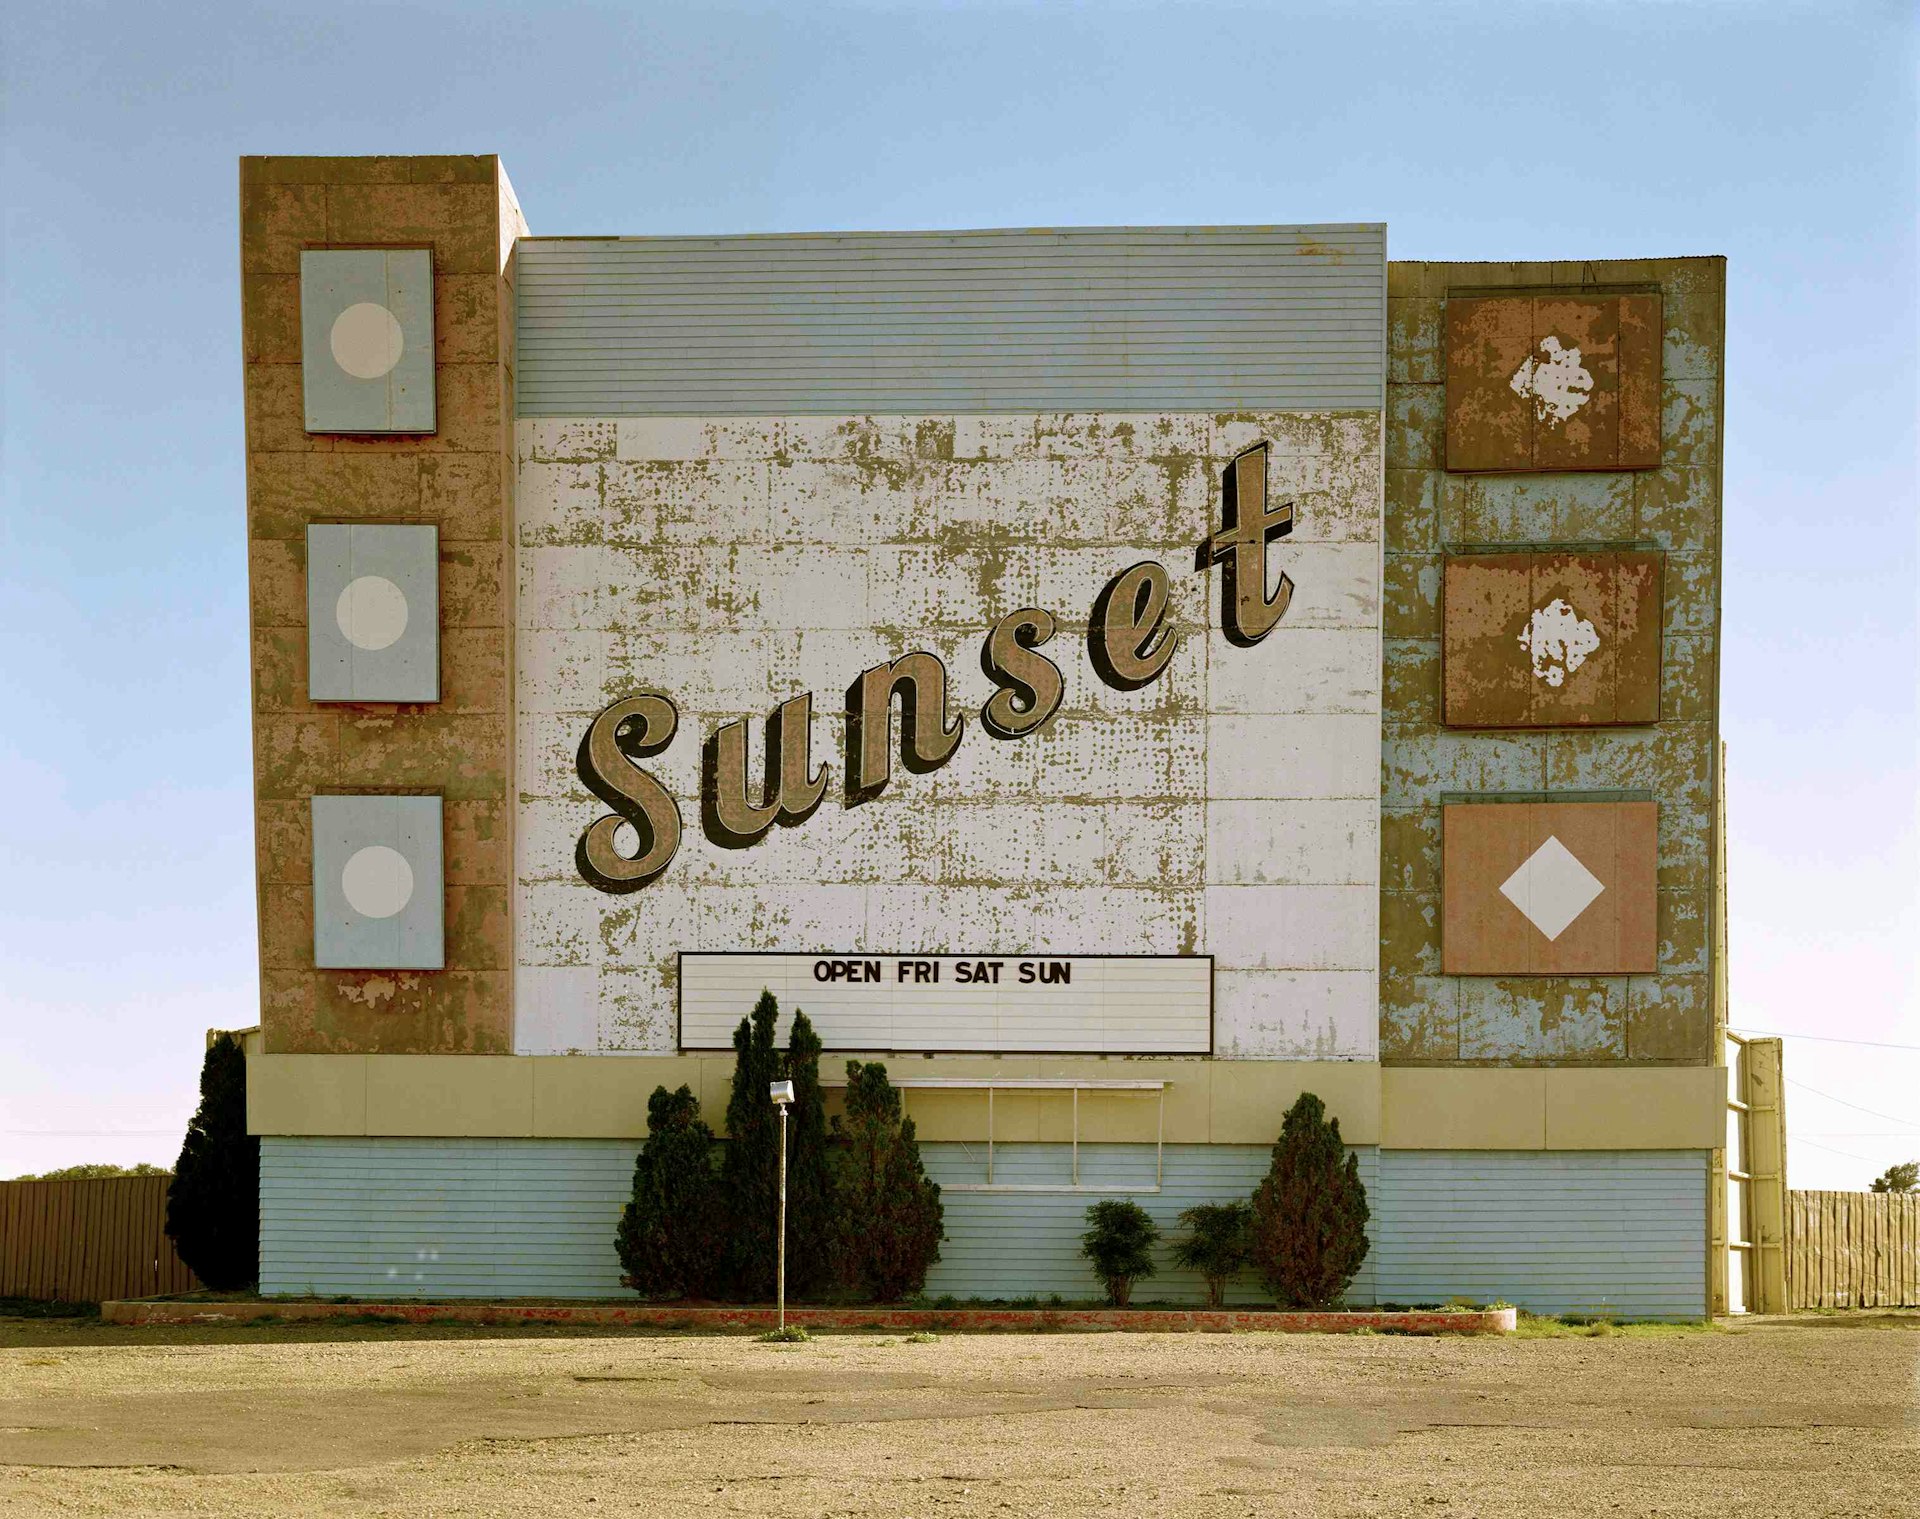 West 9th Avenue, Amarillo, Texas, October 2, 1974. The Museum of Modern Art, New York. Acquired through the generosity of an anonymous donor. © 2017 Stephen Shore